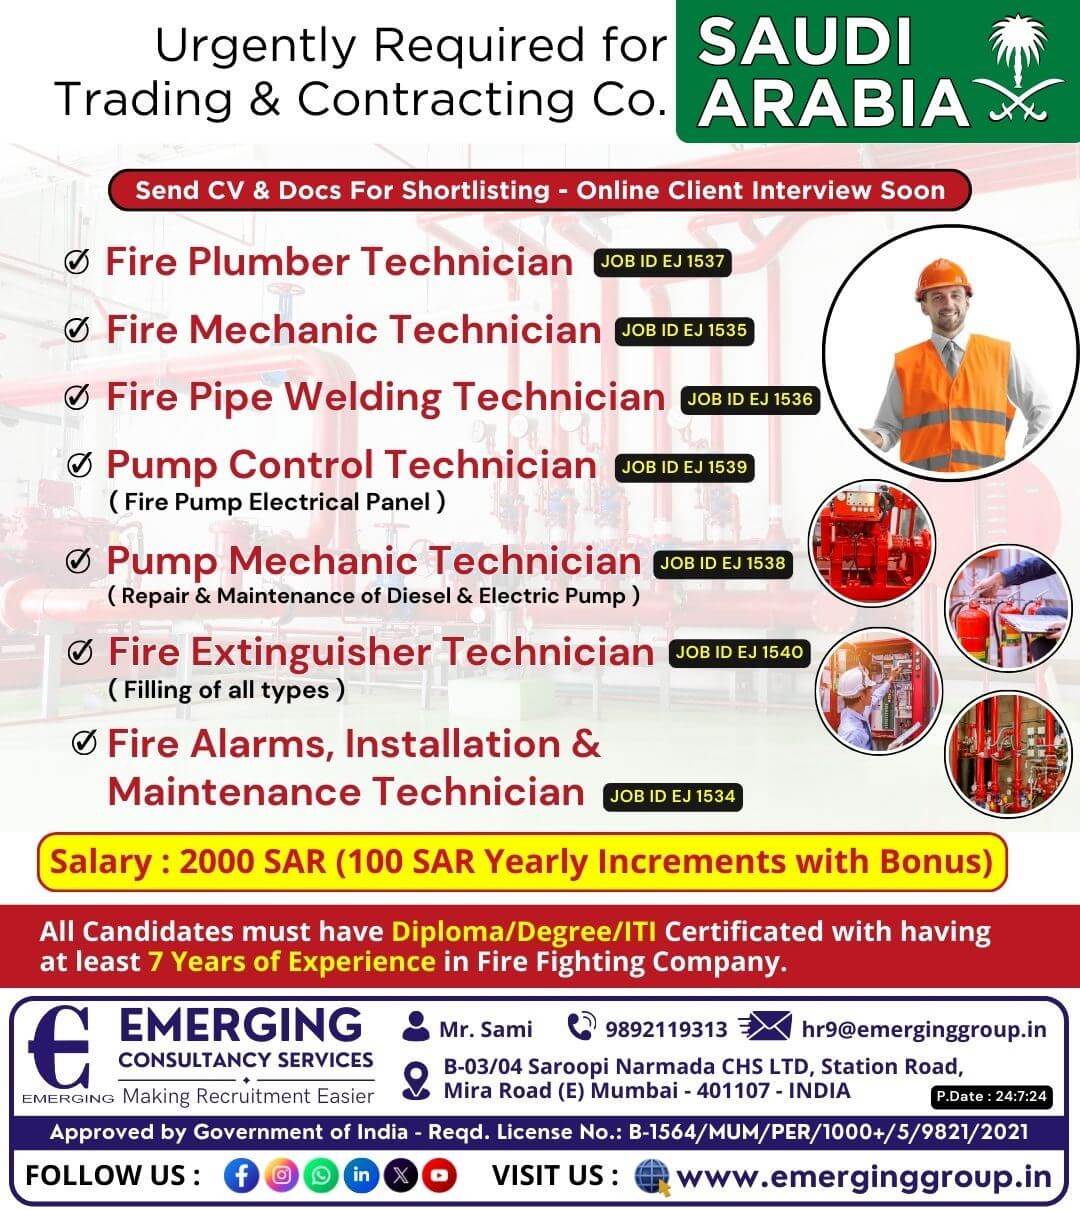 Urgently Required for Trading & Contracting Company in Saudi Arabia  (Fire Fighting Projects)